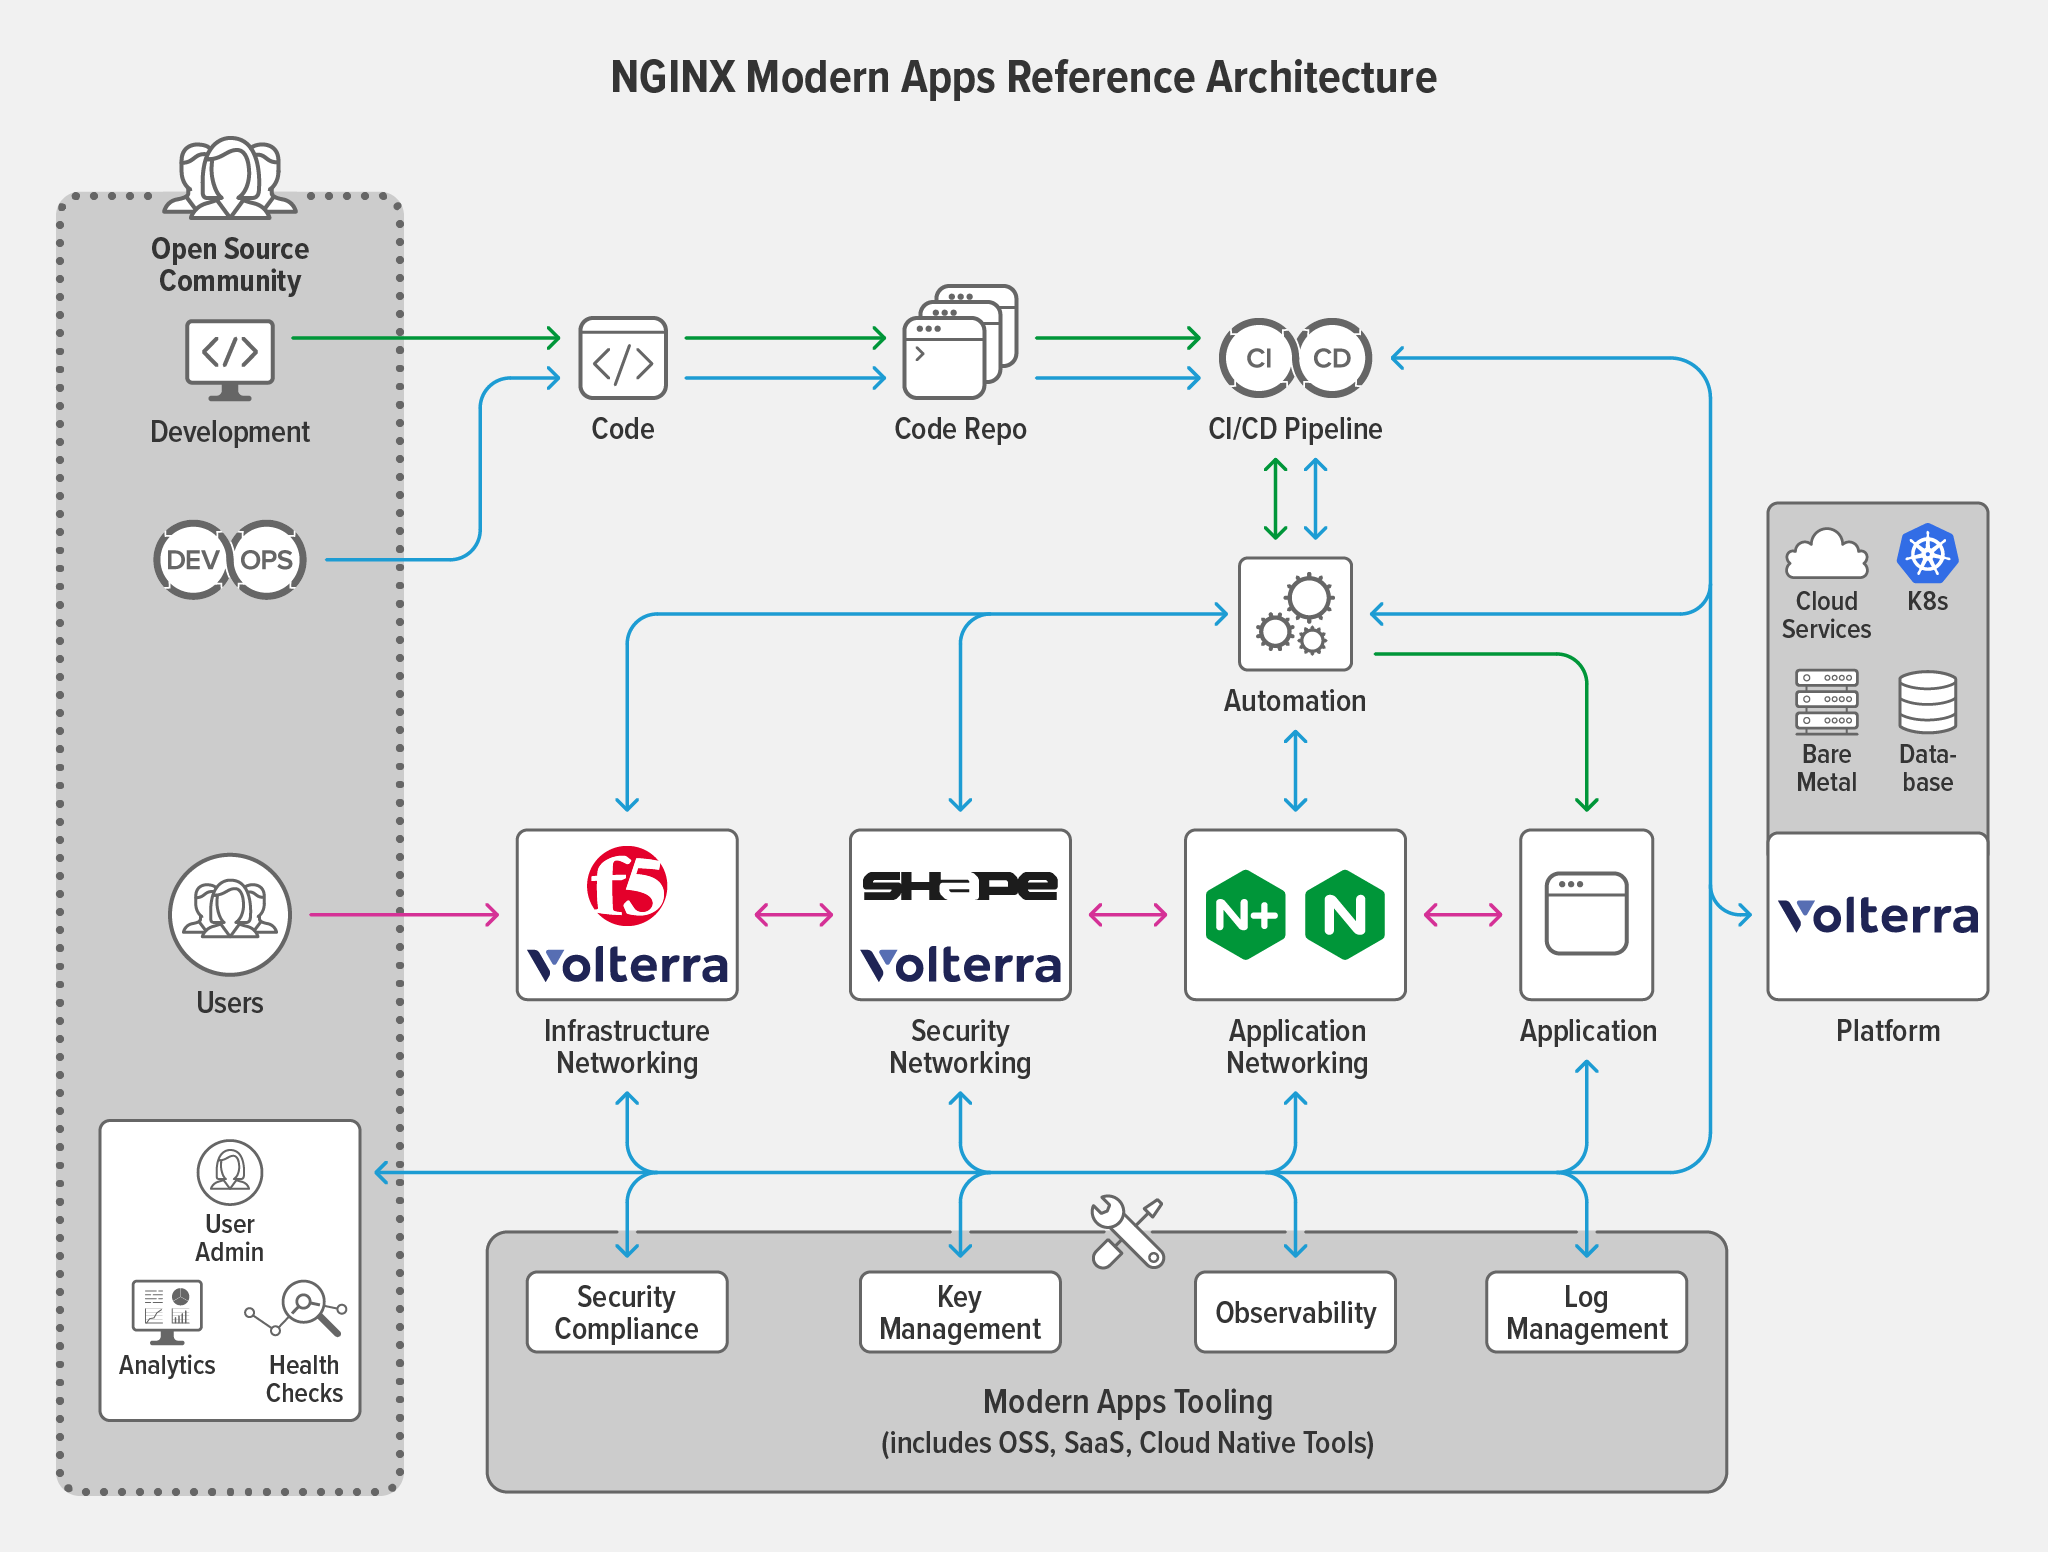 NGINX Modern Apps Reference Architecture topology diagram